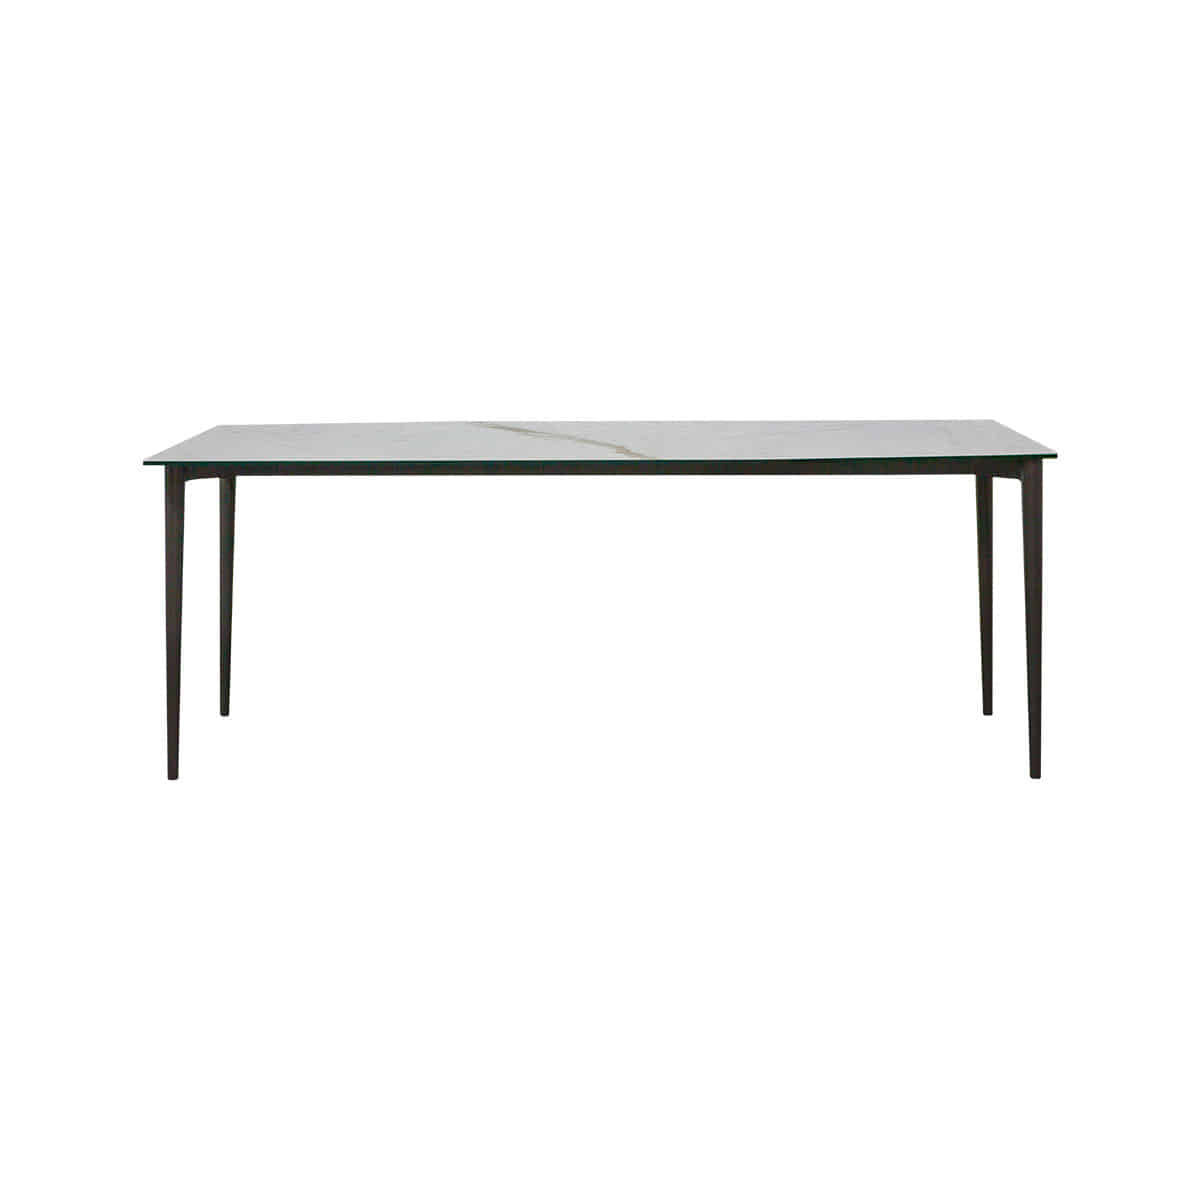 ITALSTUDIOAngle Dining Table 앵글 식탁 (아이보리)DESIGNED BY ITALY